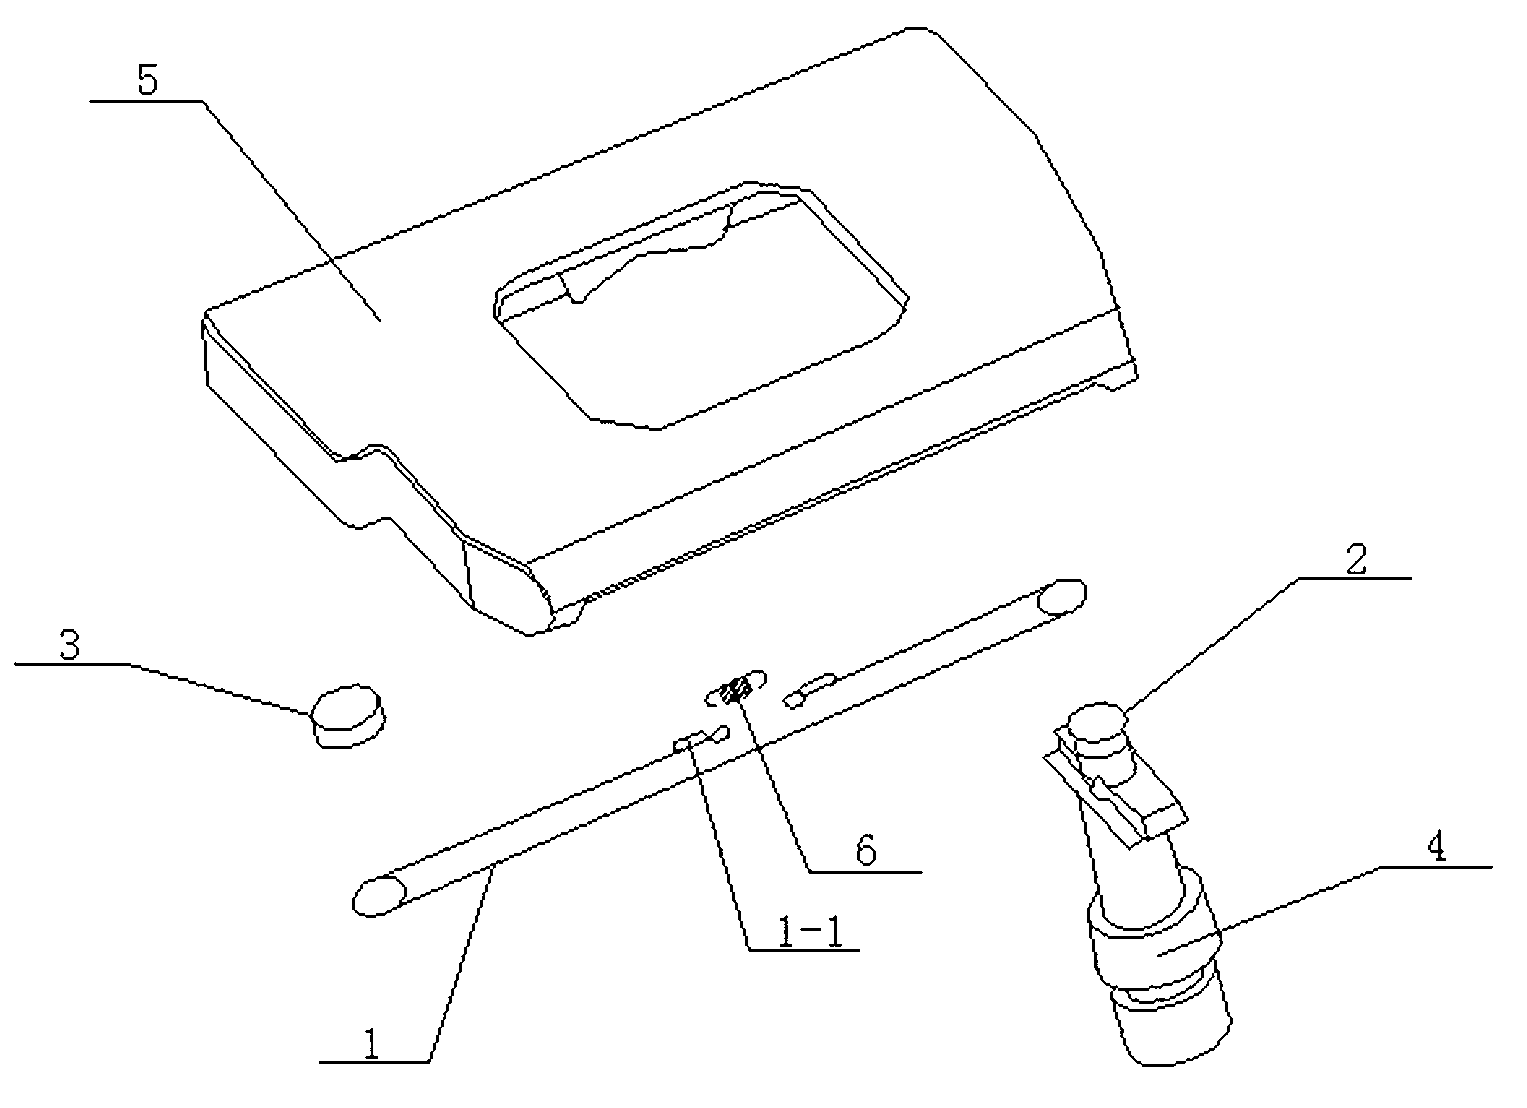 Upper table top moving device for microscope